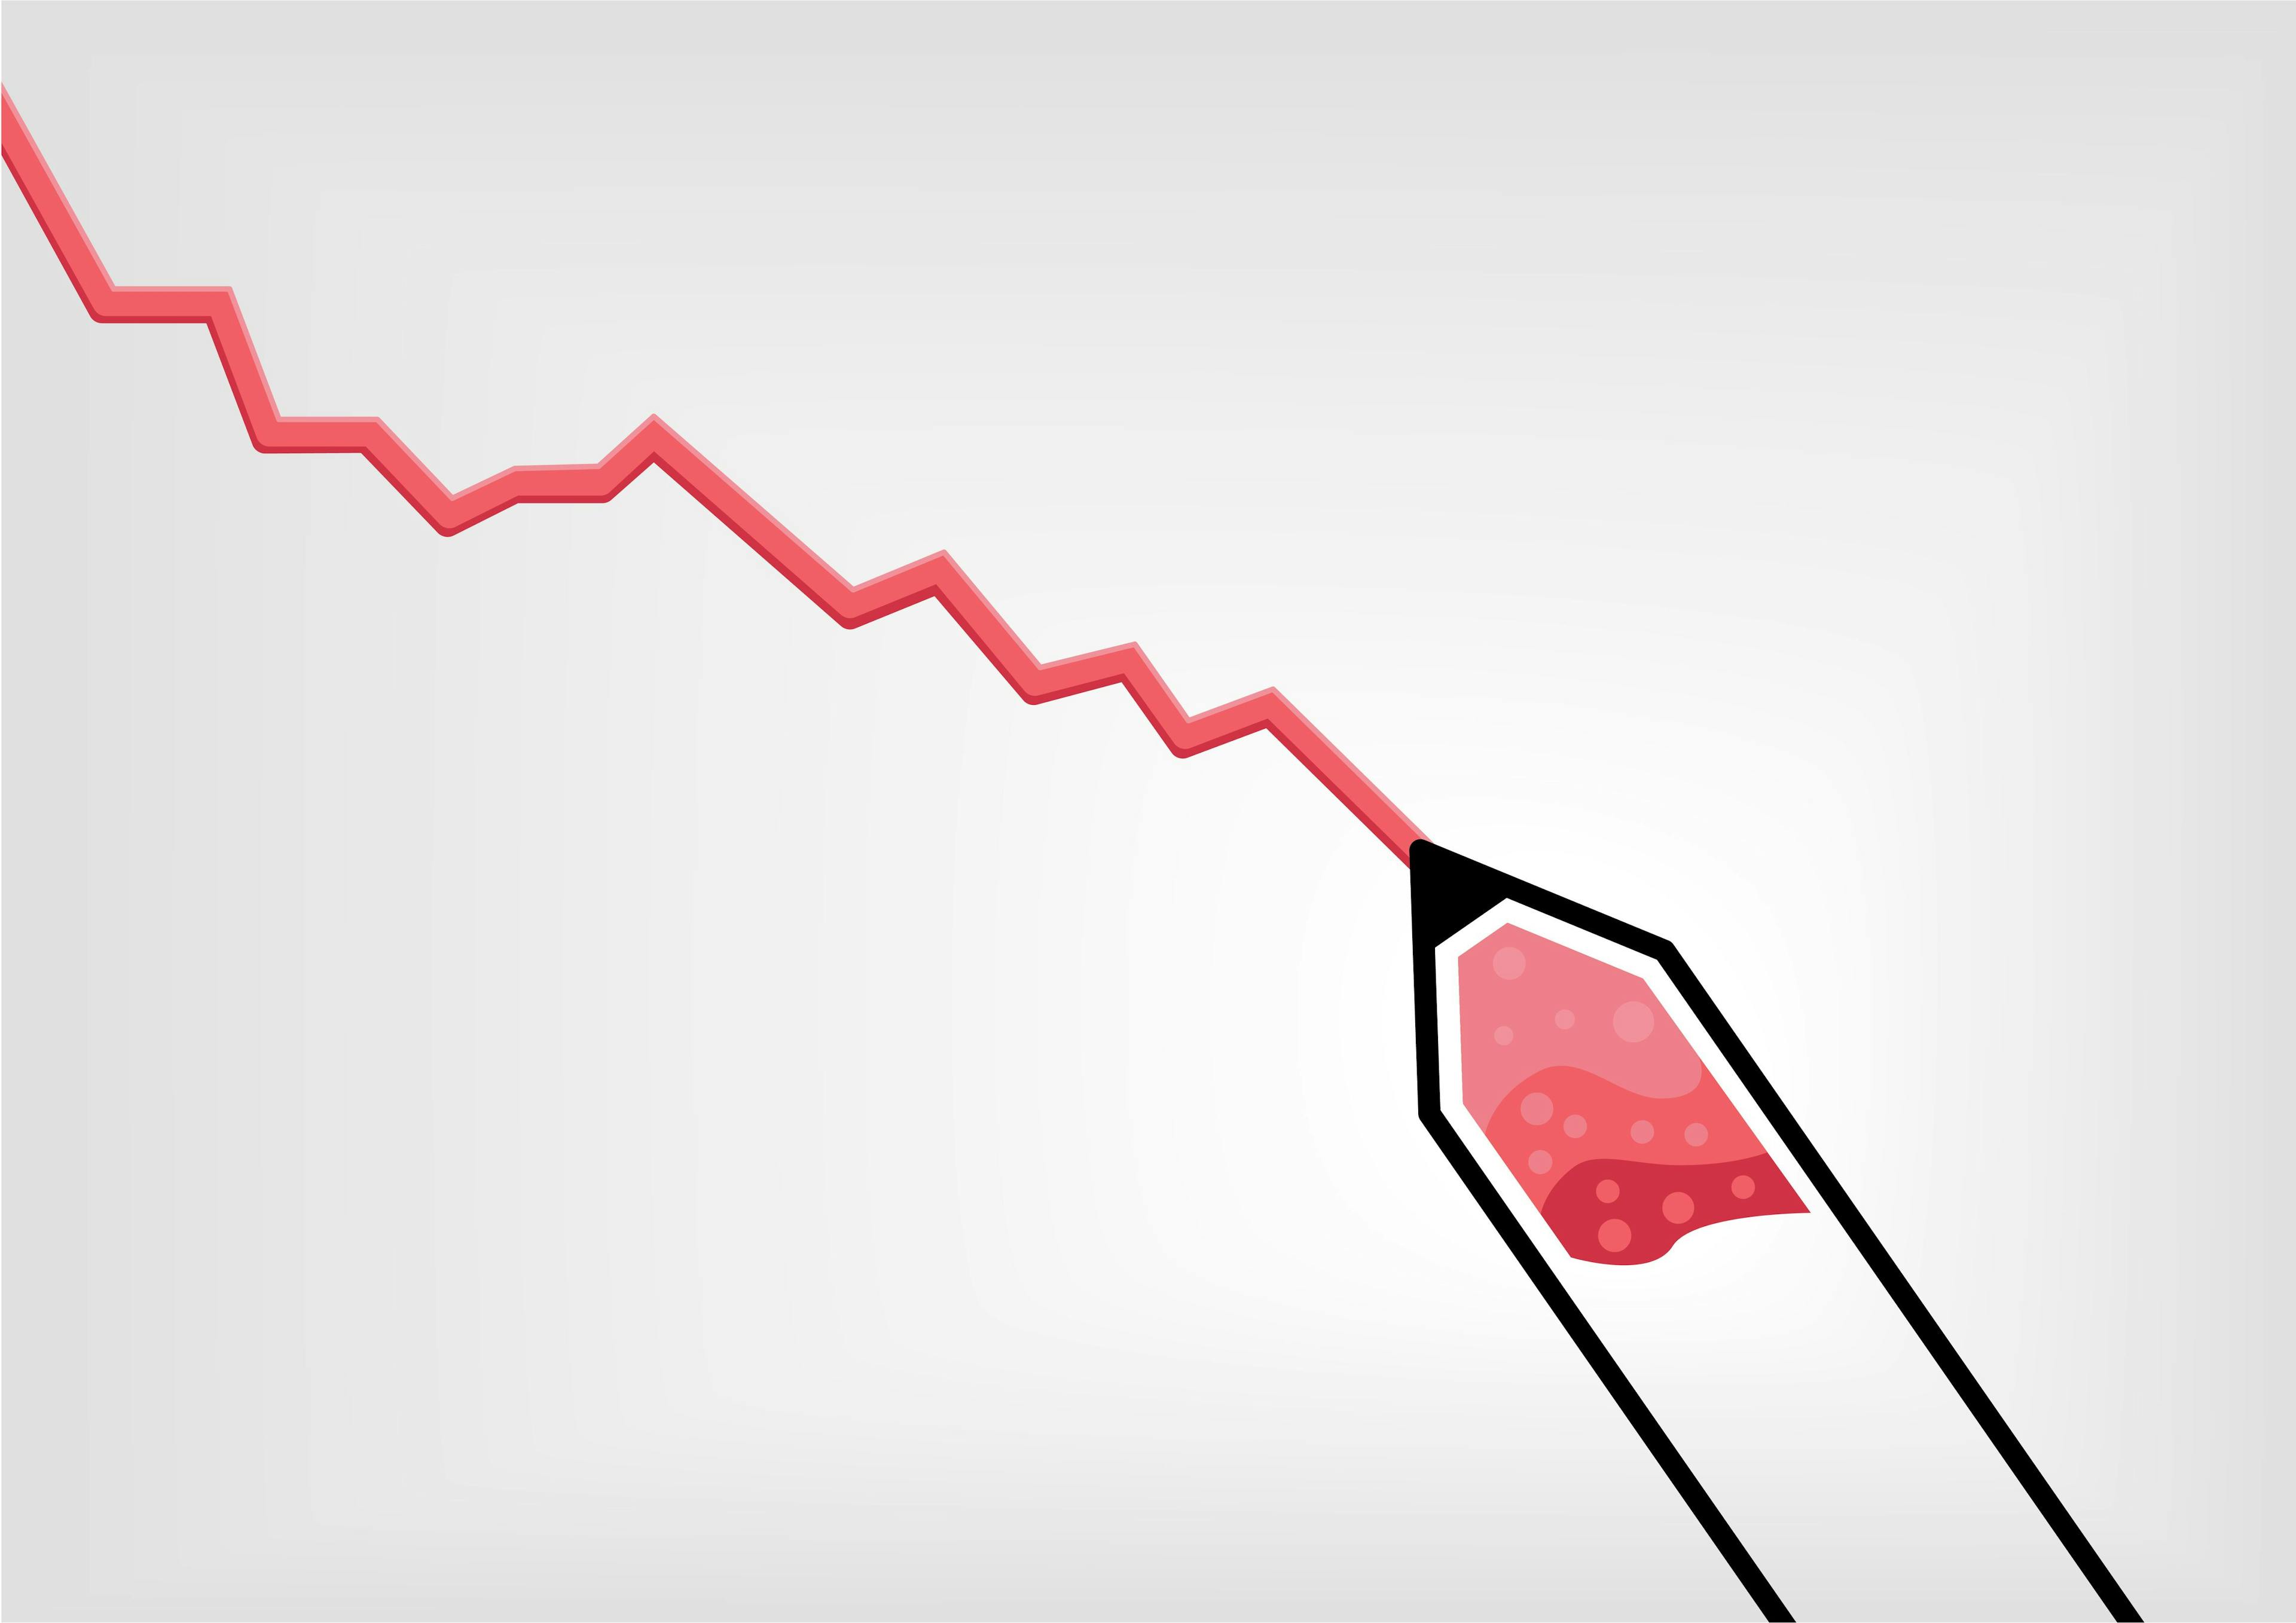 red pen drawing a declining trend line | Image credit: ©iconimage stock.adobe.com